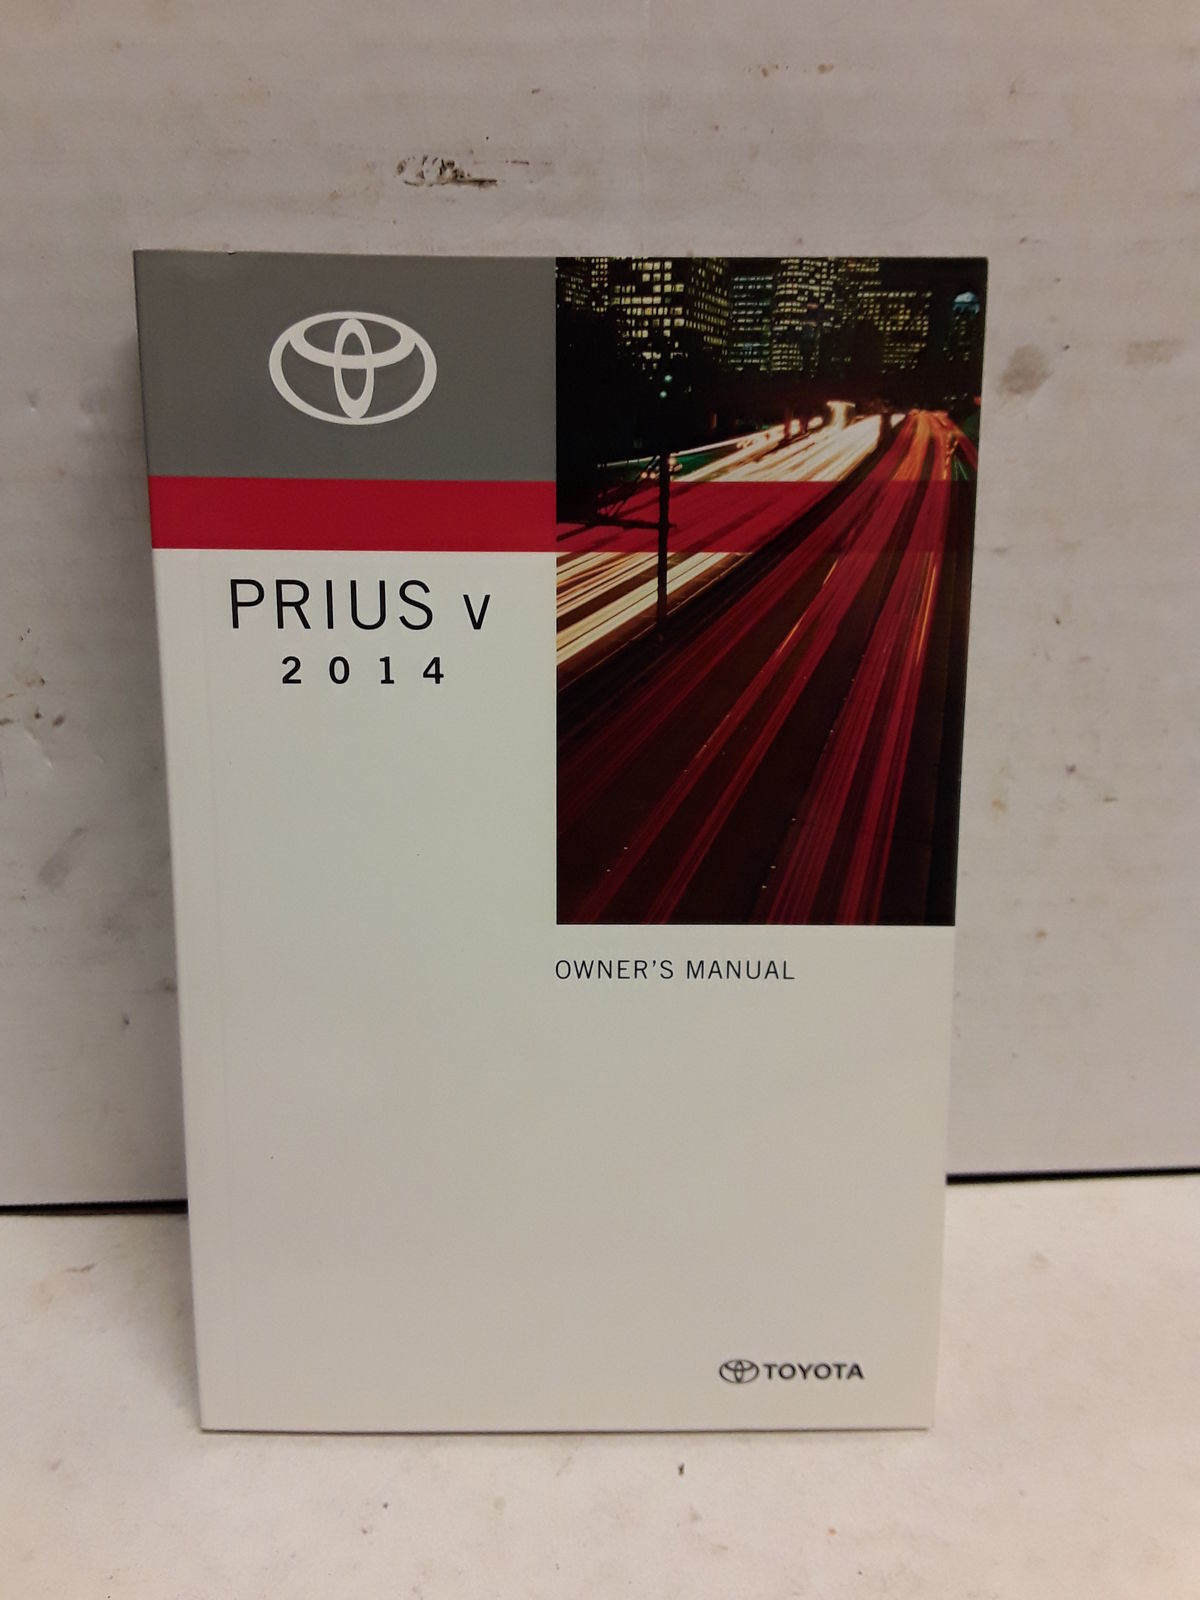 2014 Toyota Prius V Owners Manual Guide Book by Toyota - Nonfiction